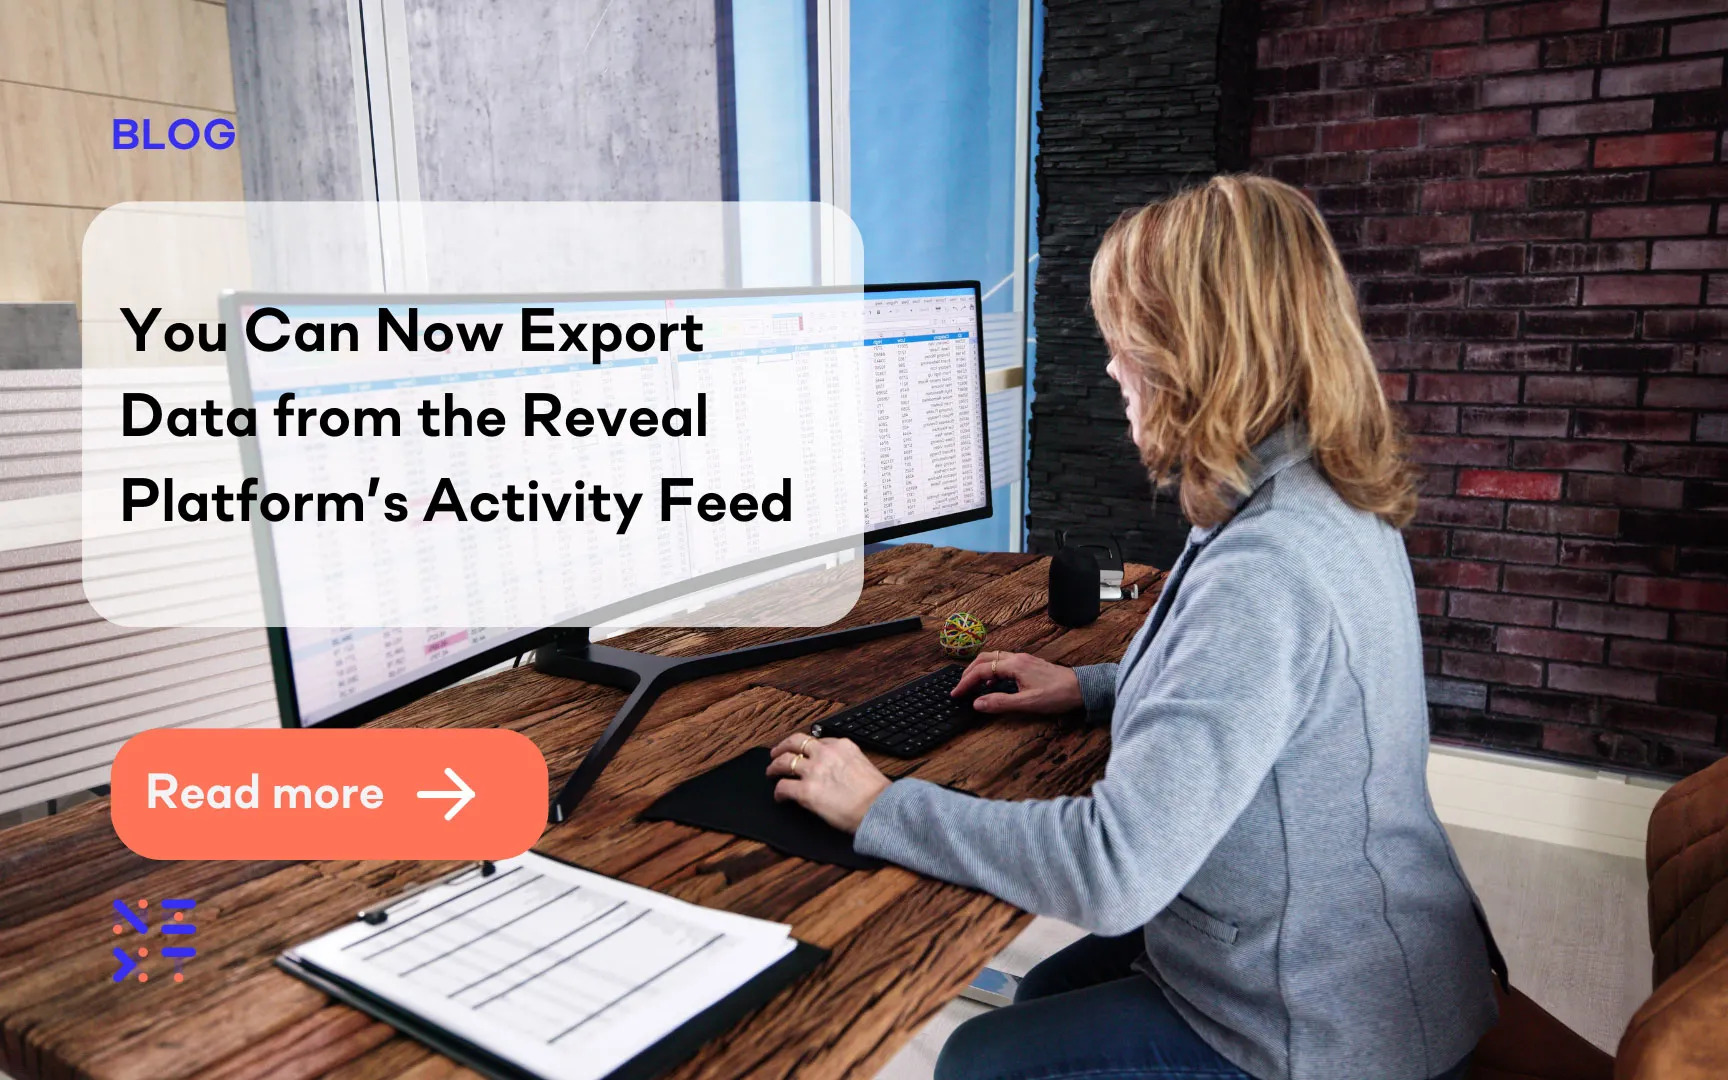 You Can Now Export Data from the Reveal Platform’s Activity Feed